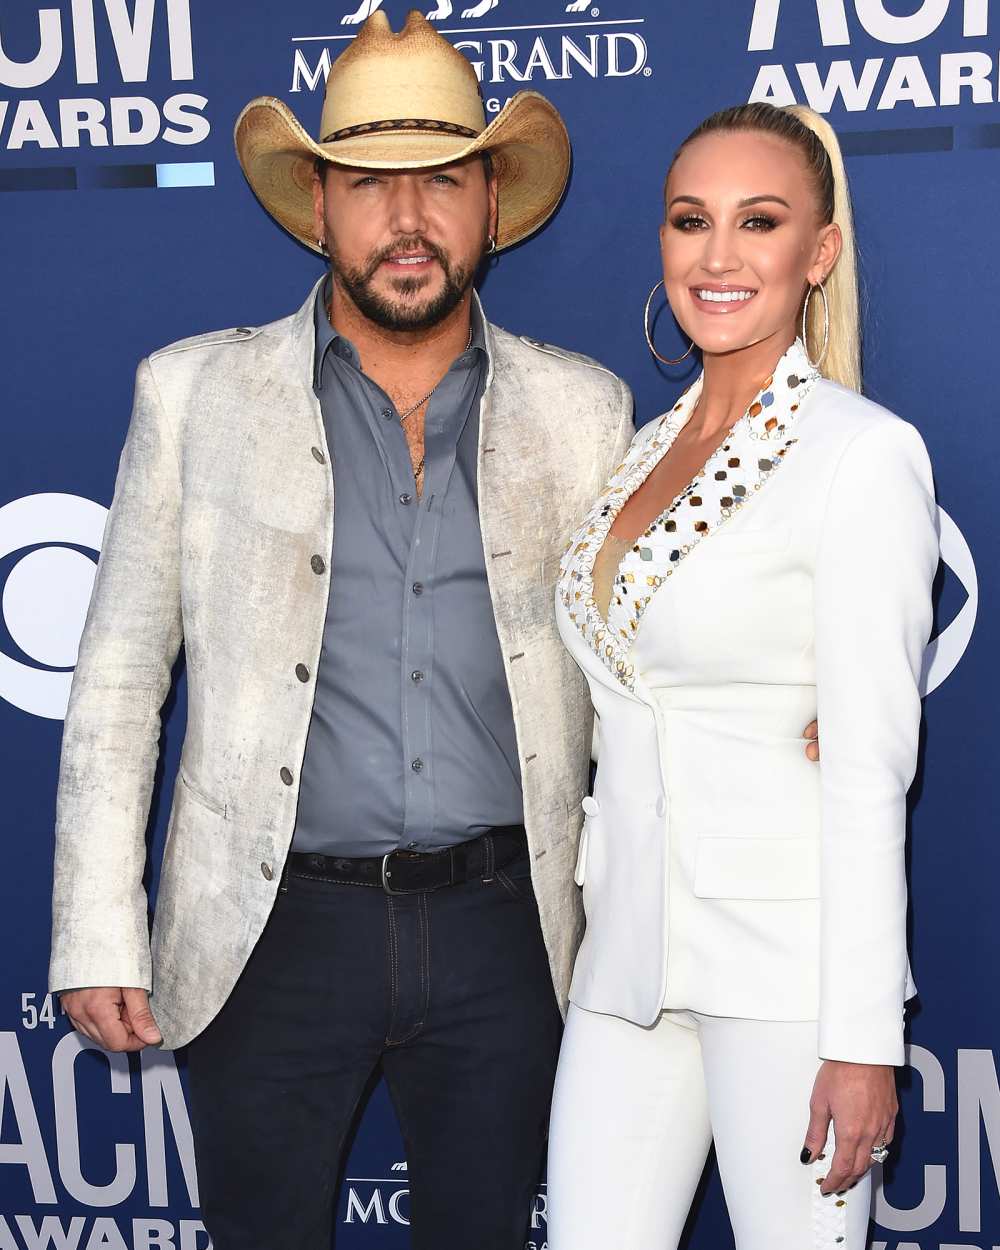 Stepmom Brittany Aldean Feels Like ‘Big Sister’ to Jason Aldean’s Daughters